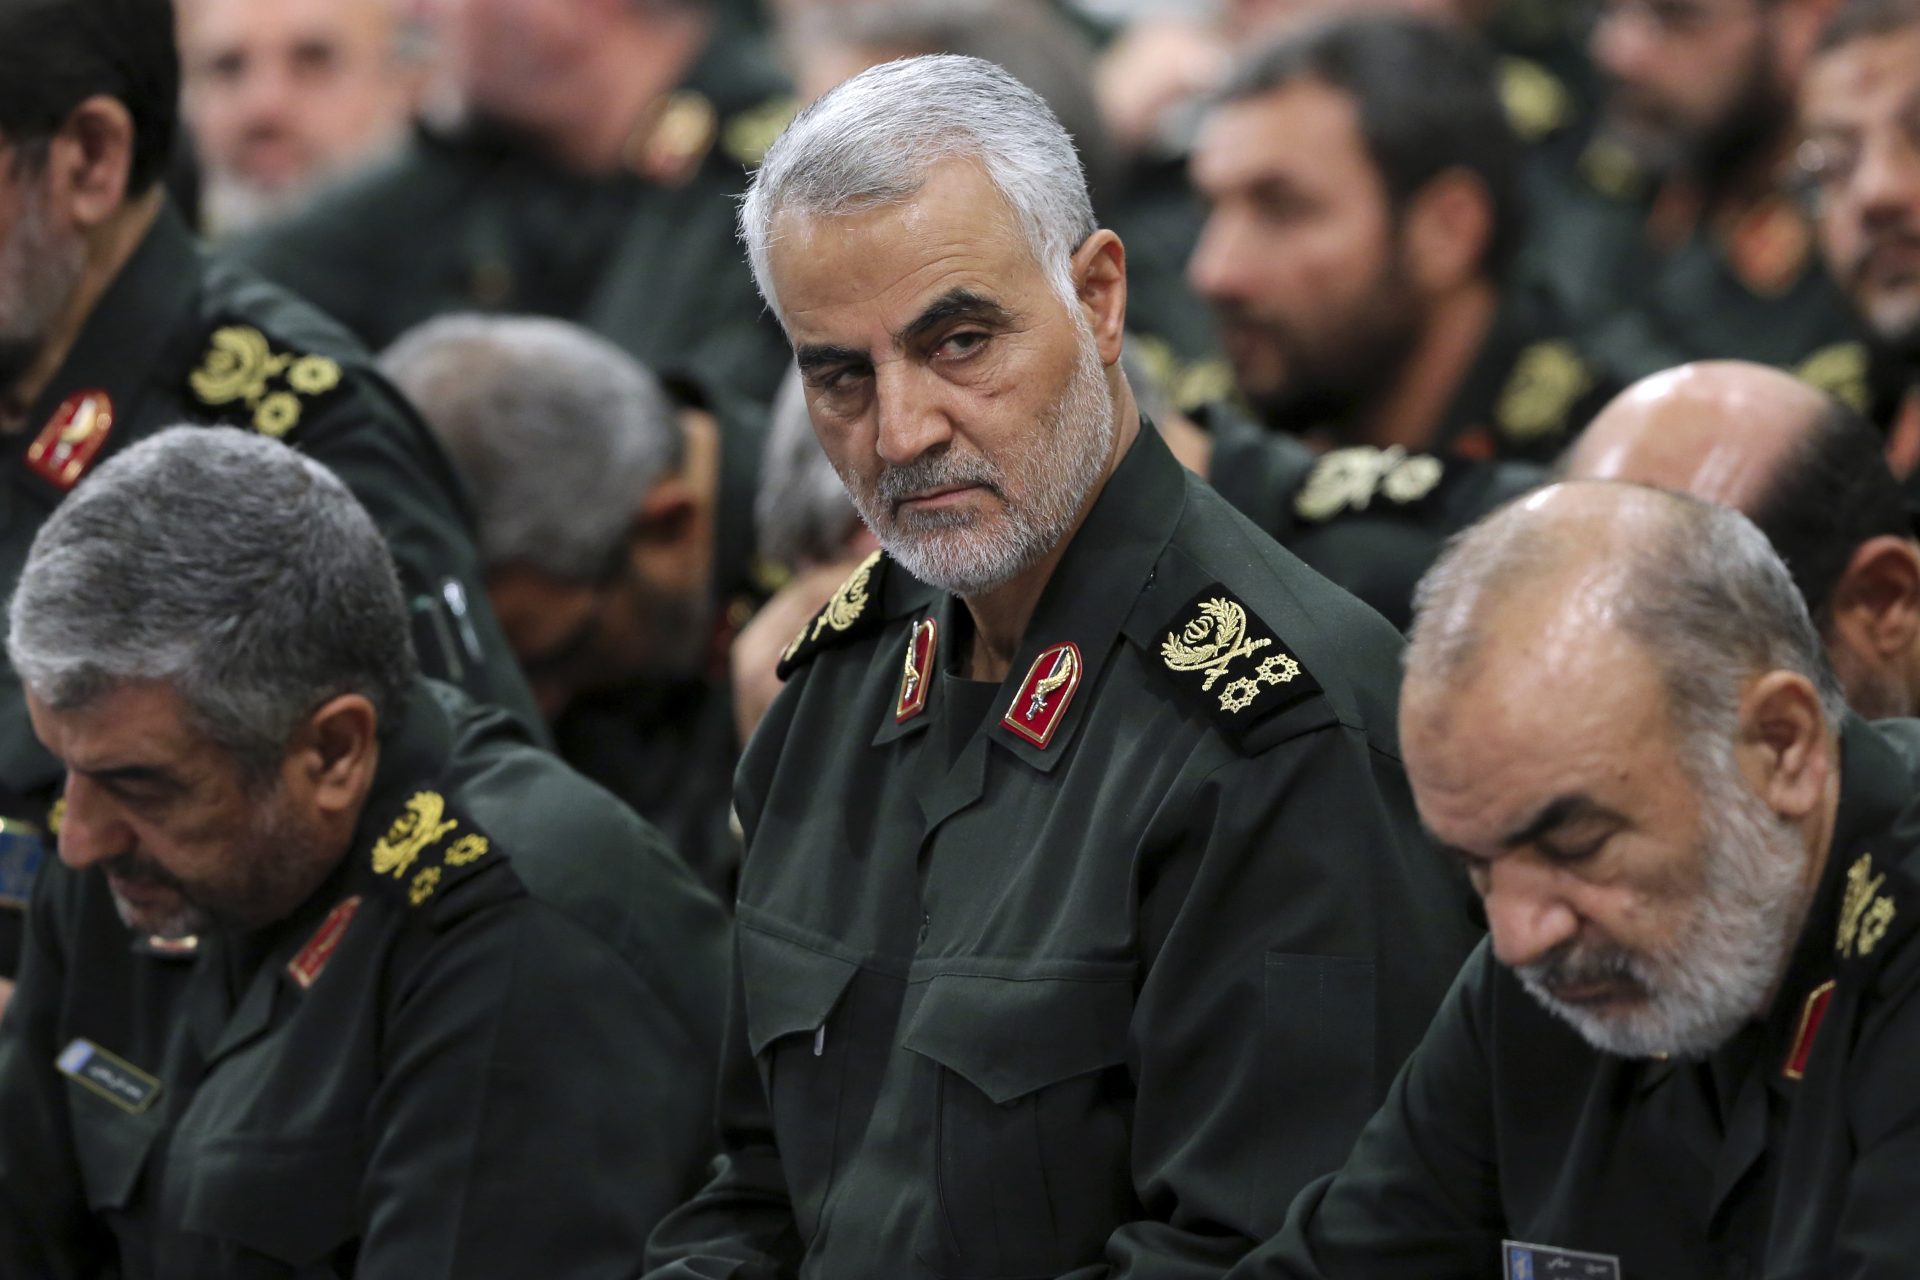 FILE PHOTO: In this Sept. 18, 2016 file photo released by an official website of the office of the Iranian supreme leader, Revolutionary Guard Gen. Qassem Soleimani, center, attends a meeting in Tehran, Iran. The long shadow war between Israel and Iran has burst into the open in recent days, with Israel allegedly striking Iran-linked targets as far away as Iraq and crash-landing two drones in Lebanon. These incidents, along with an air raid in Syria that Israel says thwarted an imminent Iranian drone attack, have raised tensions at a particularly fraught time. Israel said Soleimani masterminded the alleged drone attack.